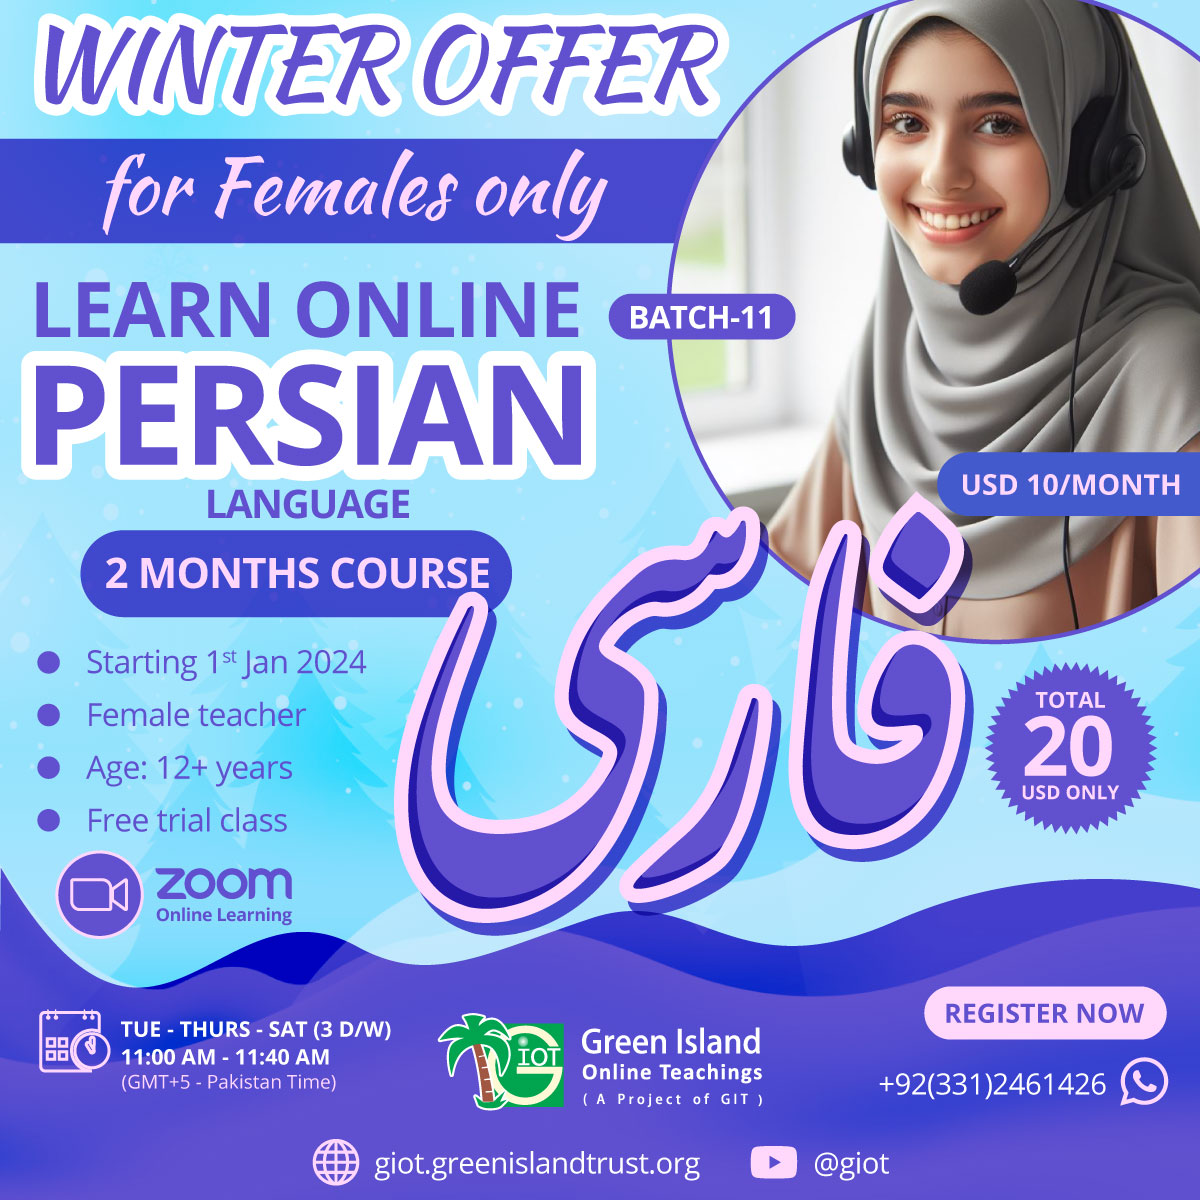 Learn Persian Language Online with GIOT's Winter Offer!